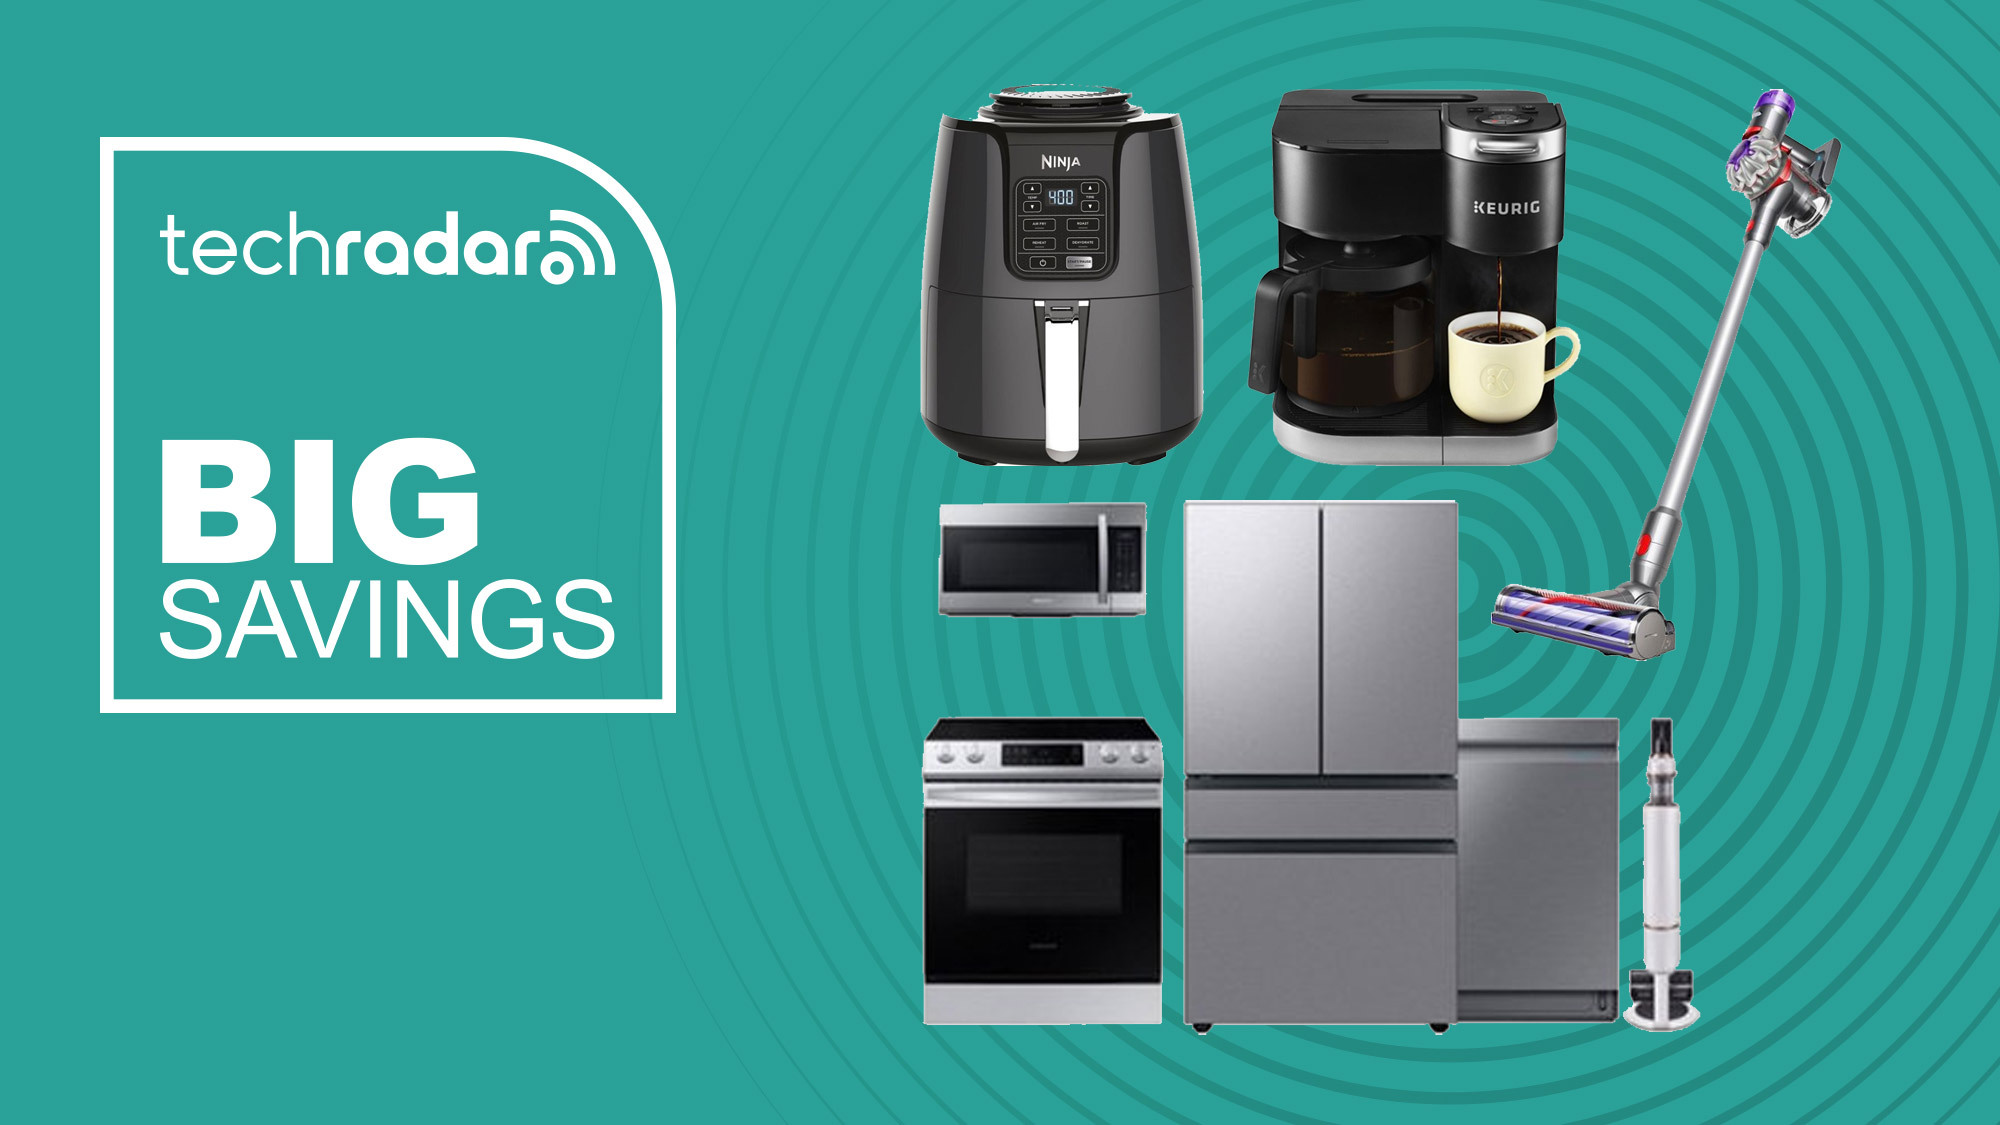 Wayfair clearance sale: Deals on kitchen, appliances during Prime Day 